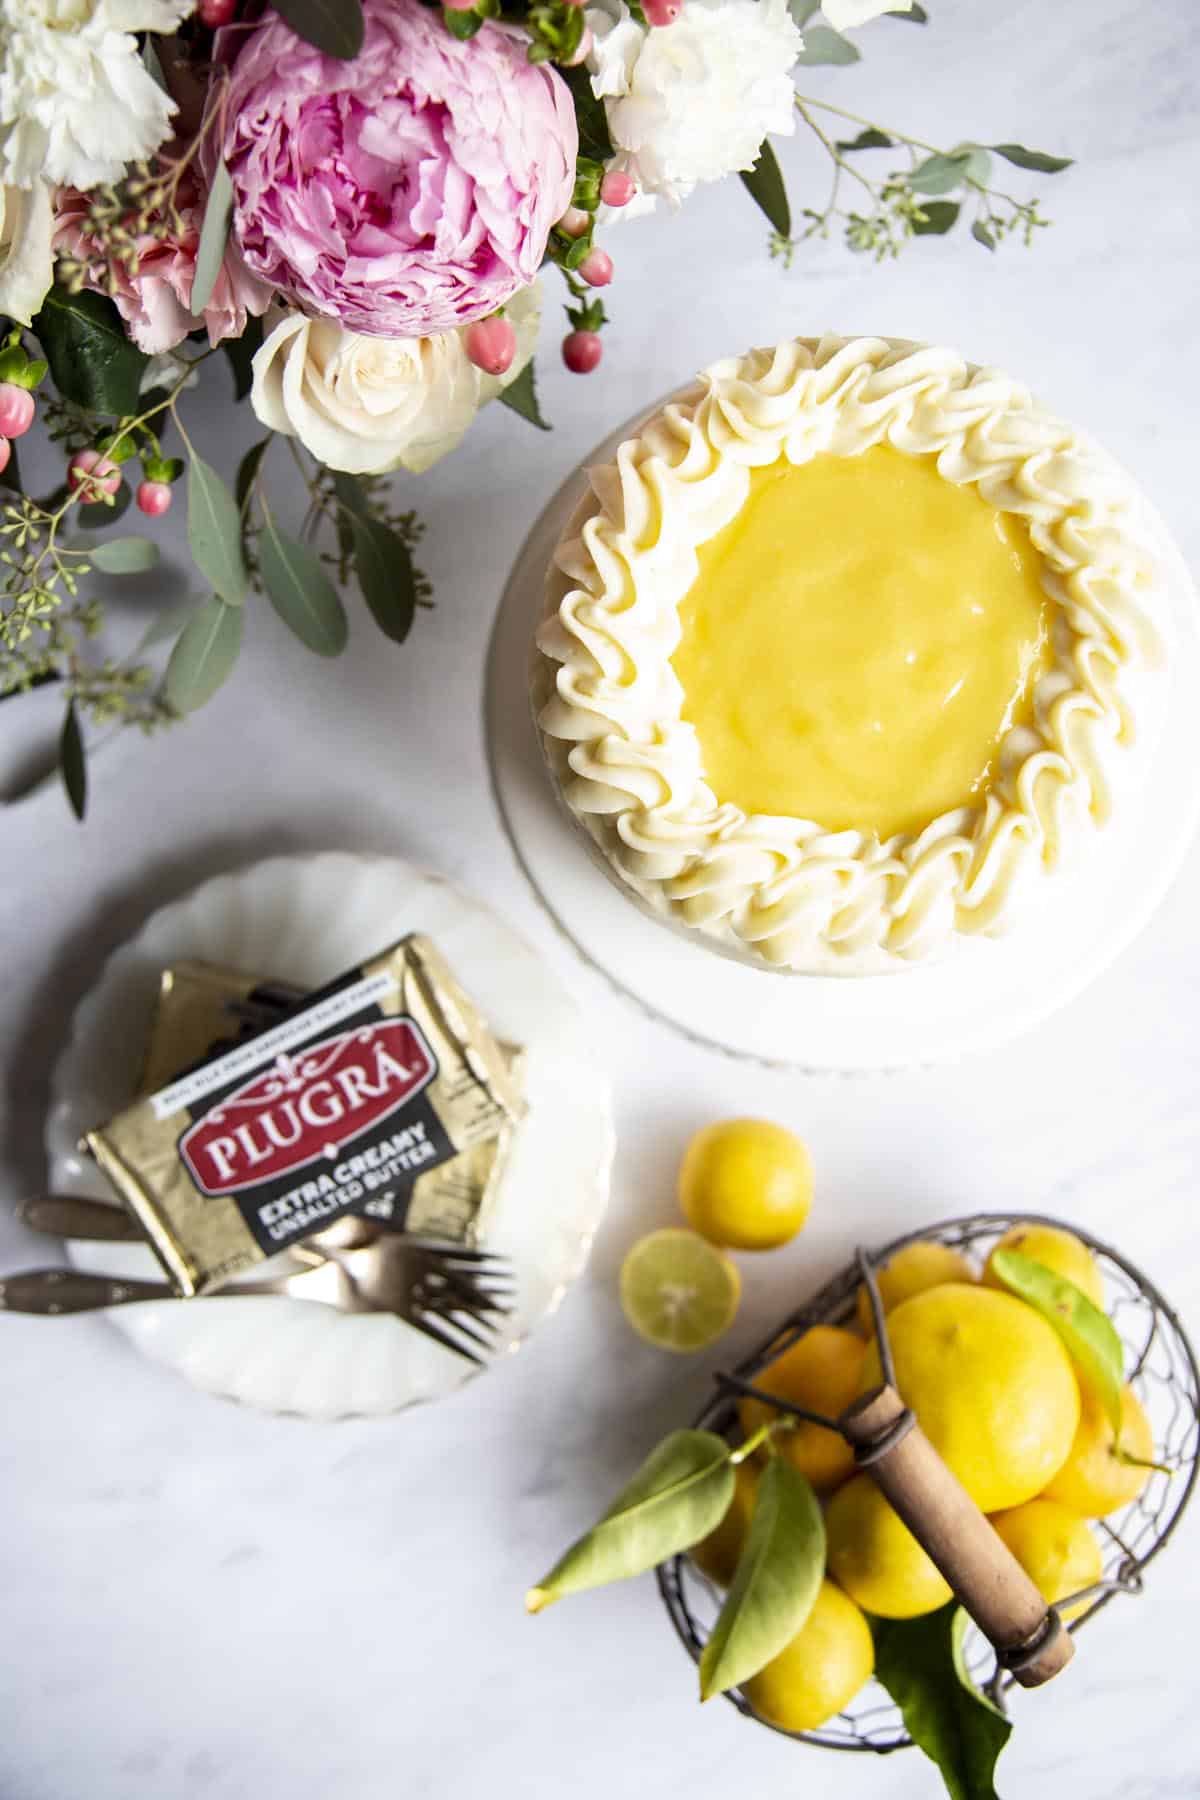 Lemon cake on a cake stand next to some flowers, a basket of lemon and a block of Plugra butter